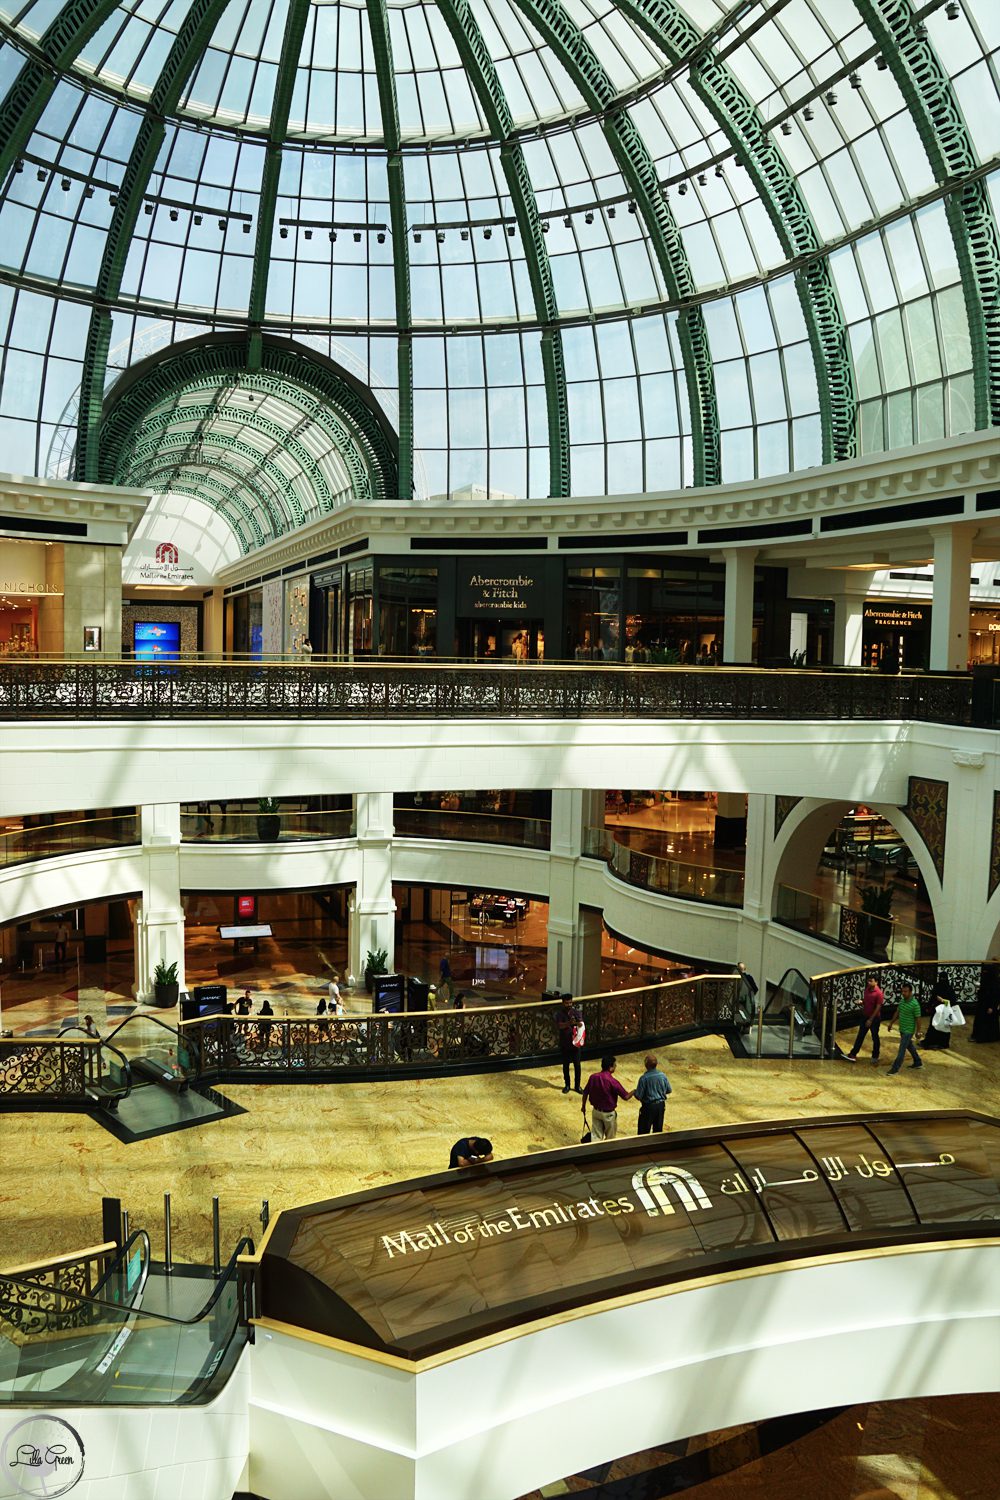 The Mall of Emirates, shopping in Dubai